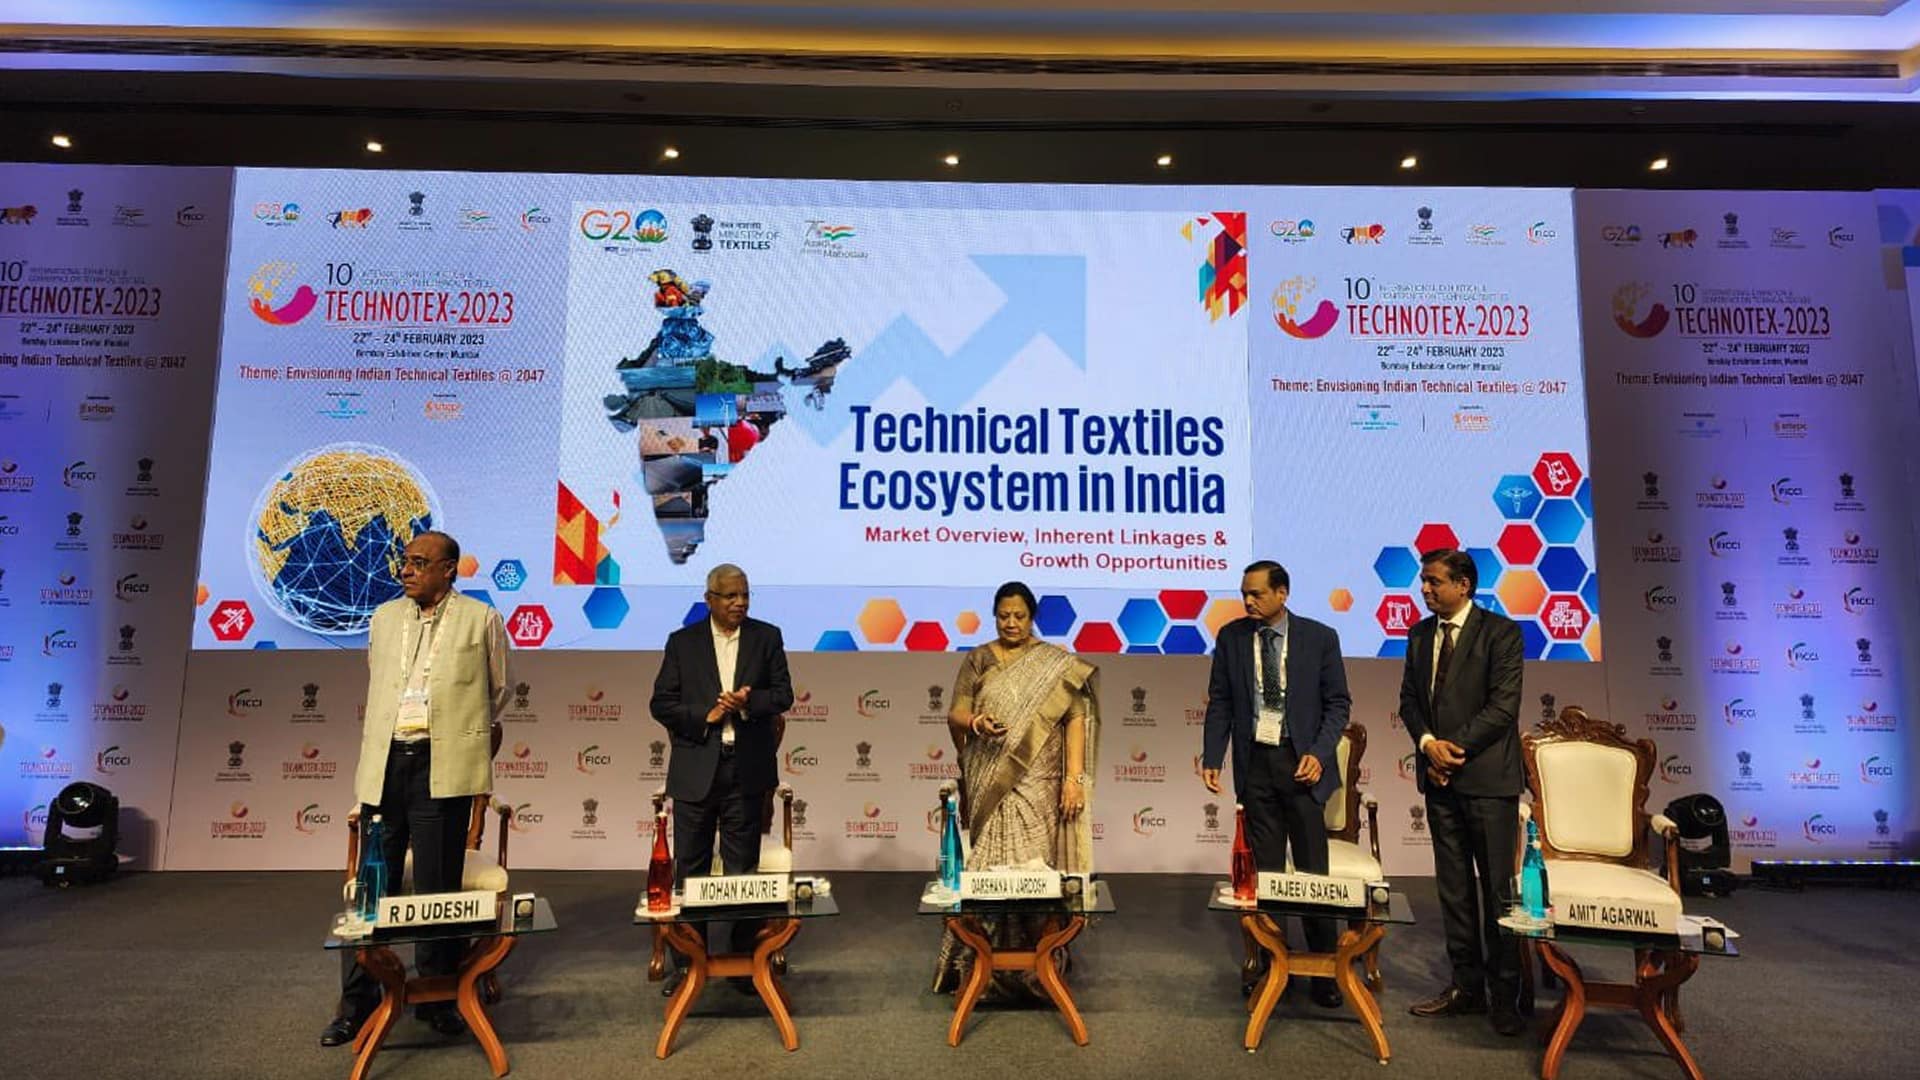 The Ministry of Textiles, Govt. of India and FICCI organize the 10th edition of Technotex 2023